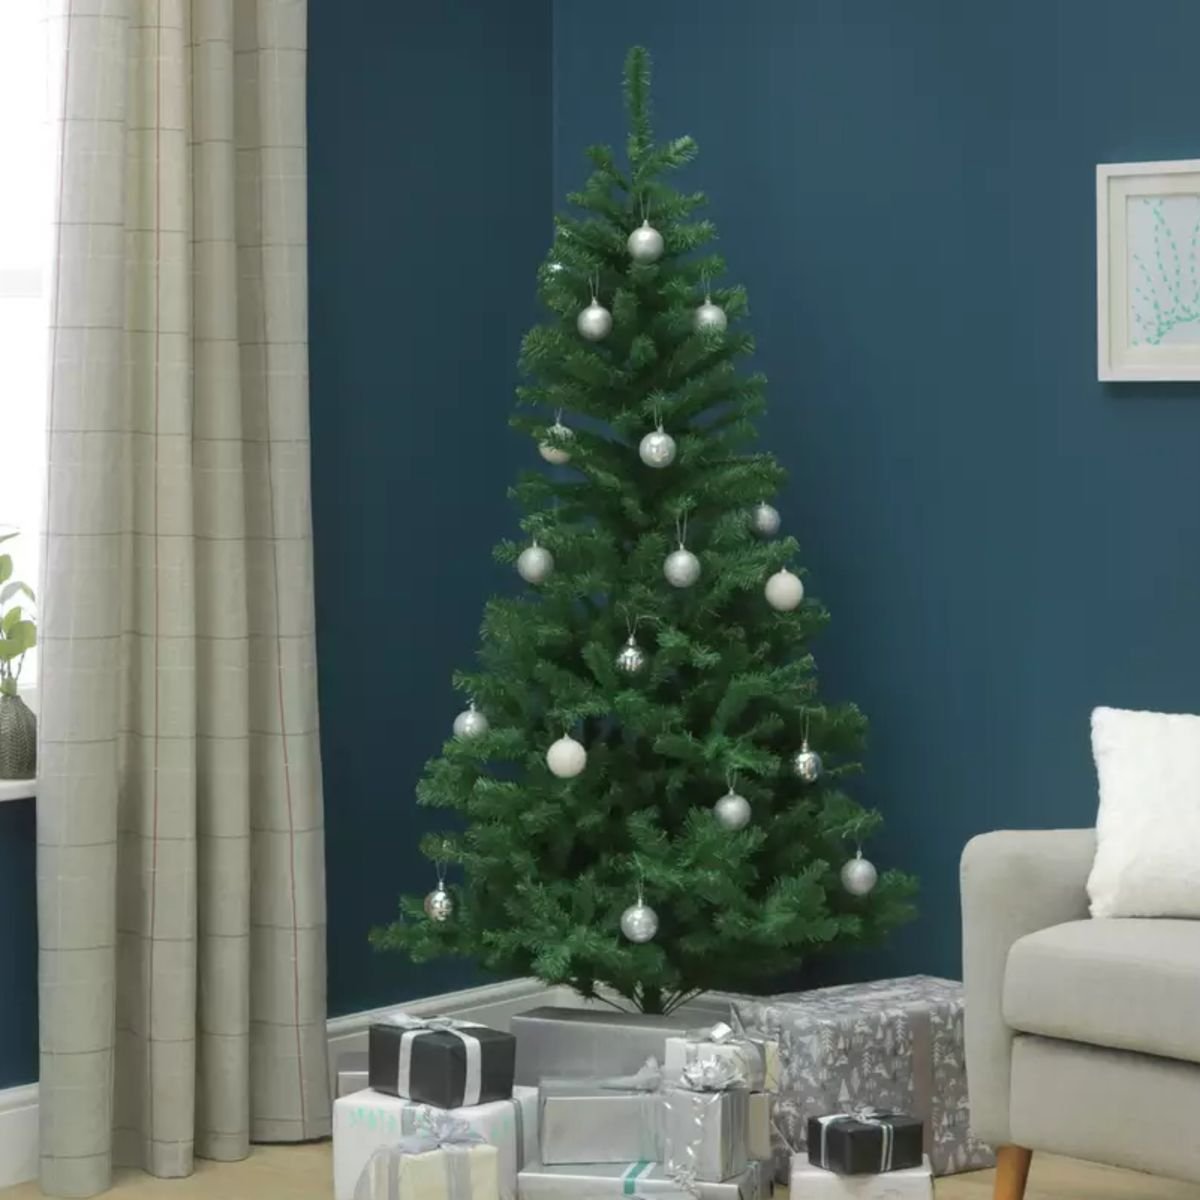 Our favourite budget Christmas tree is at its lowest-ever price this Black Friday for just £16